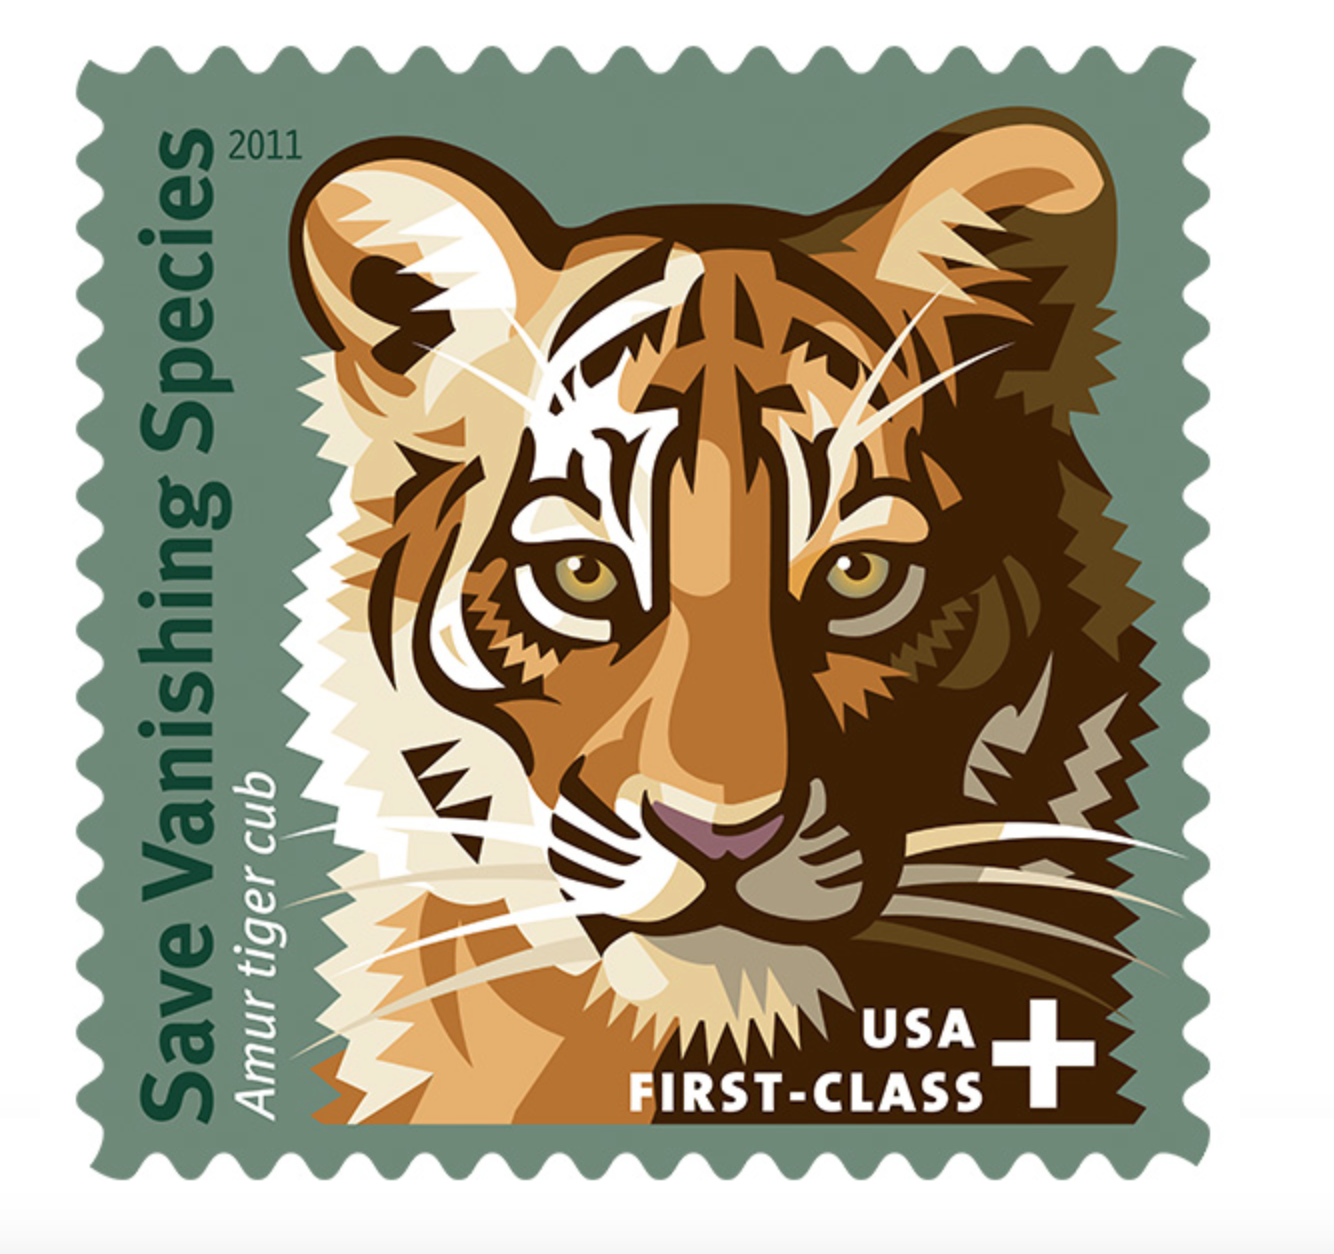 Save Vanishing Species semipostal stamp showing an artistic rendition of an Amur tiger cub